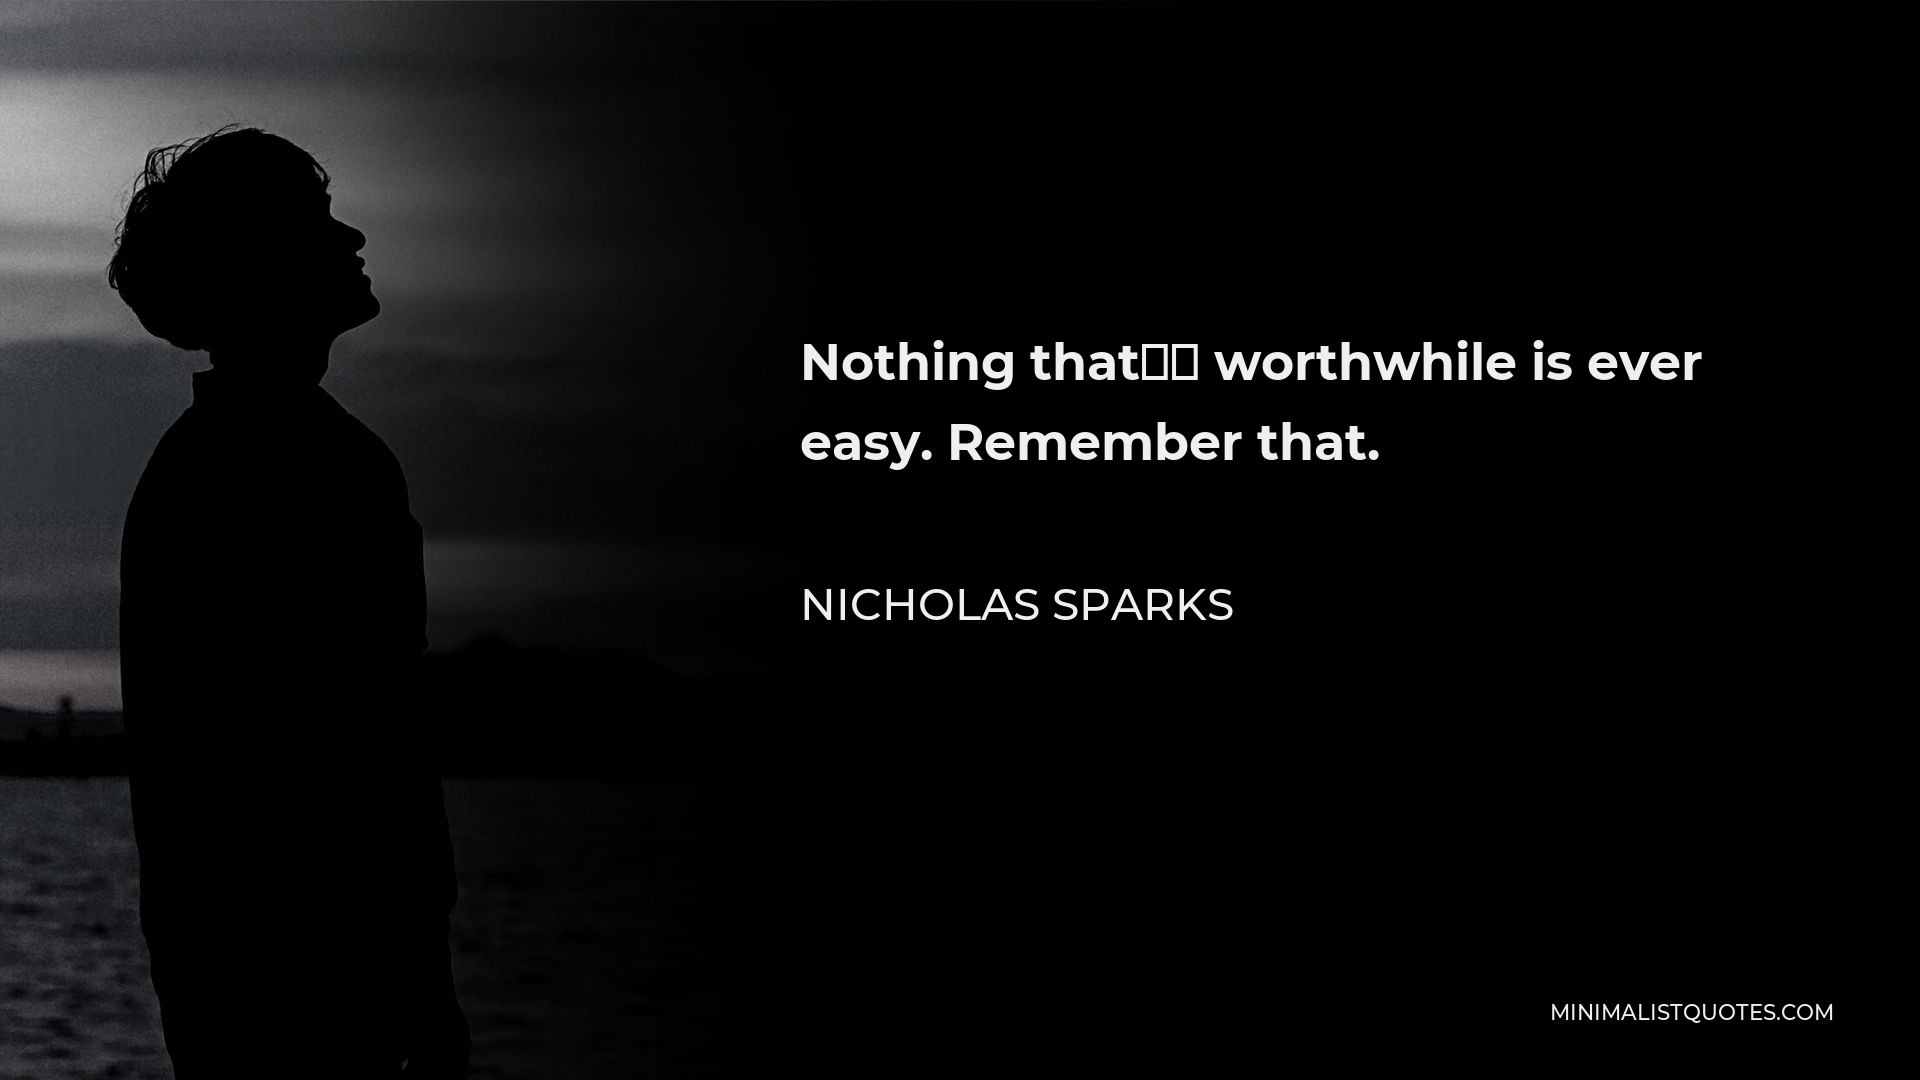 Nicholas Sparks Quote - Nothing that’s worthwhile is ever easy. Remember that.